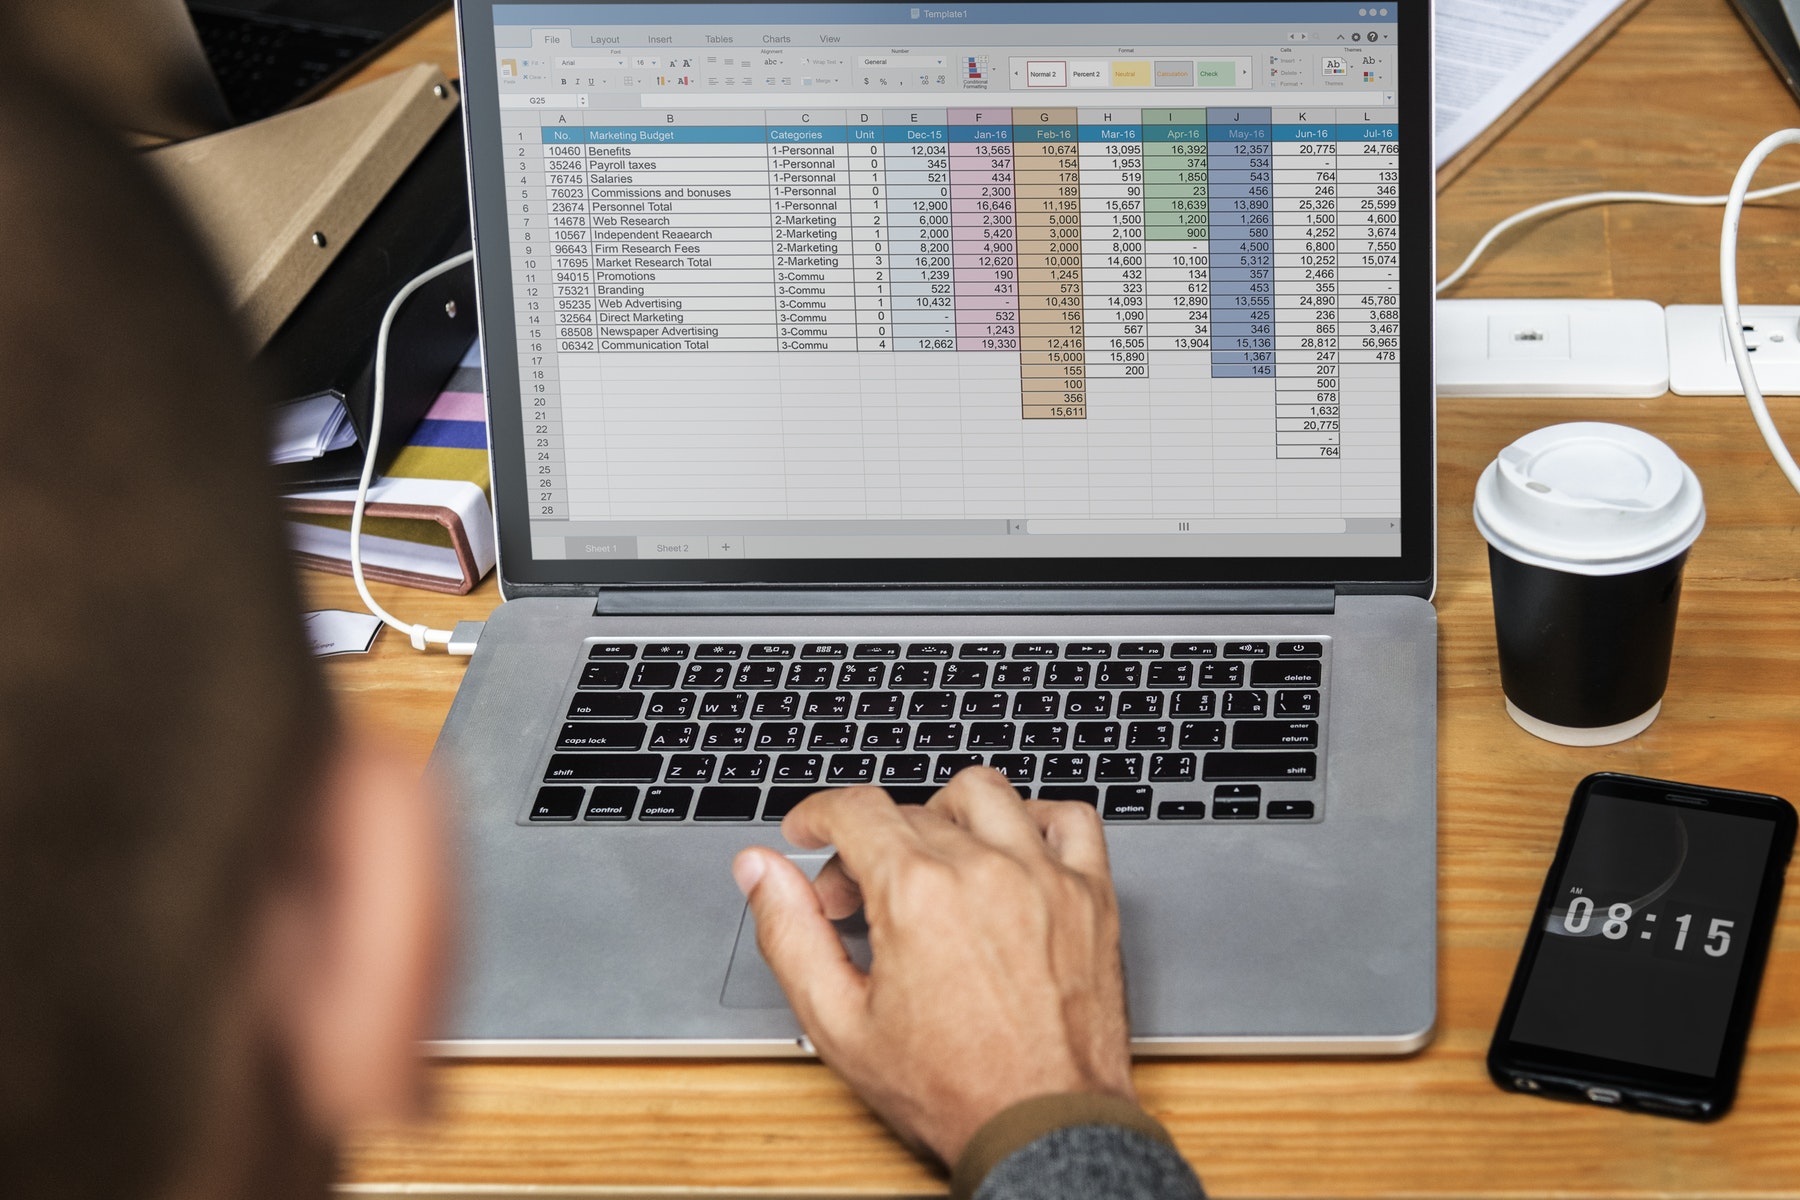 14 New Excel Worksheet Functions That Will Blow Your Mind!